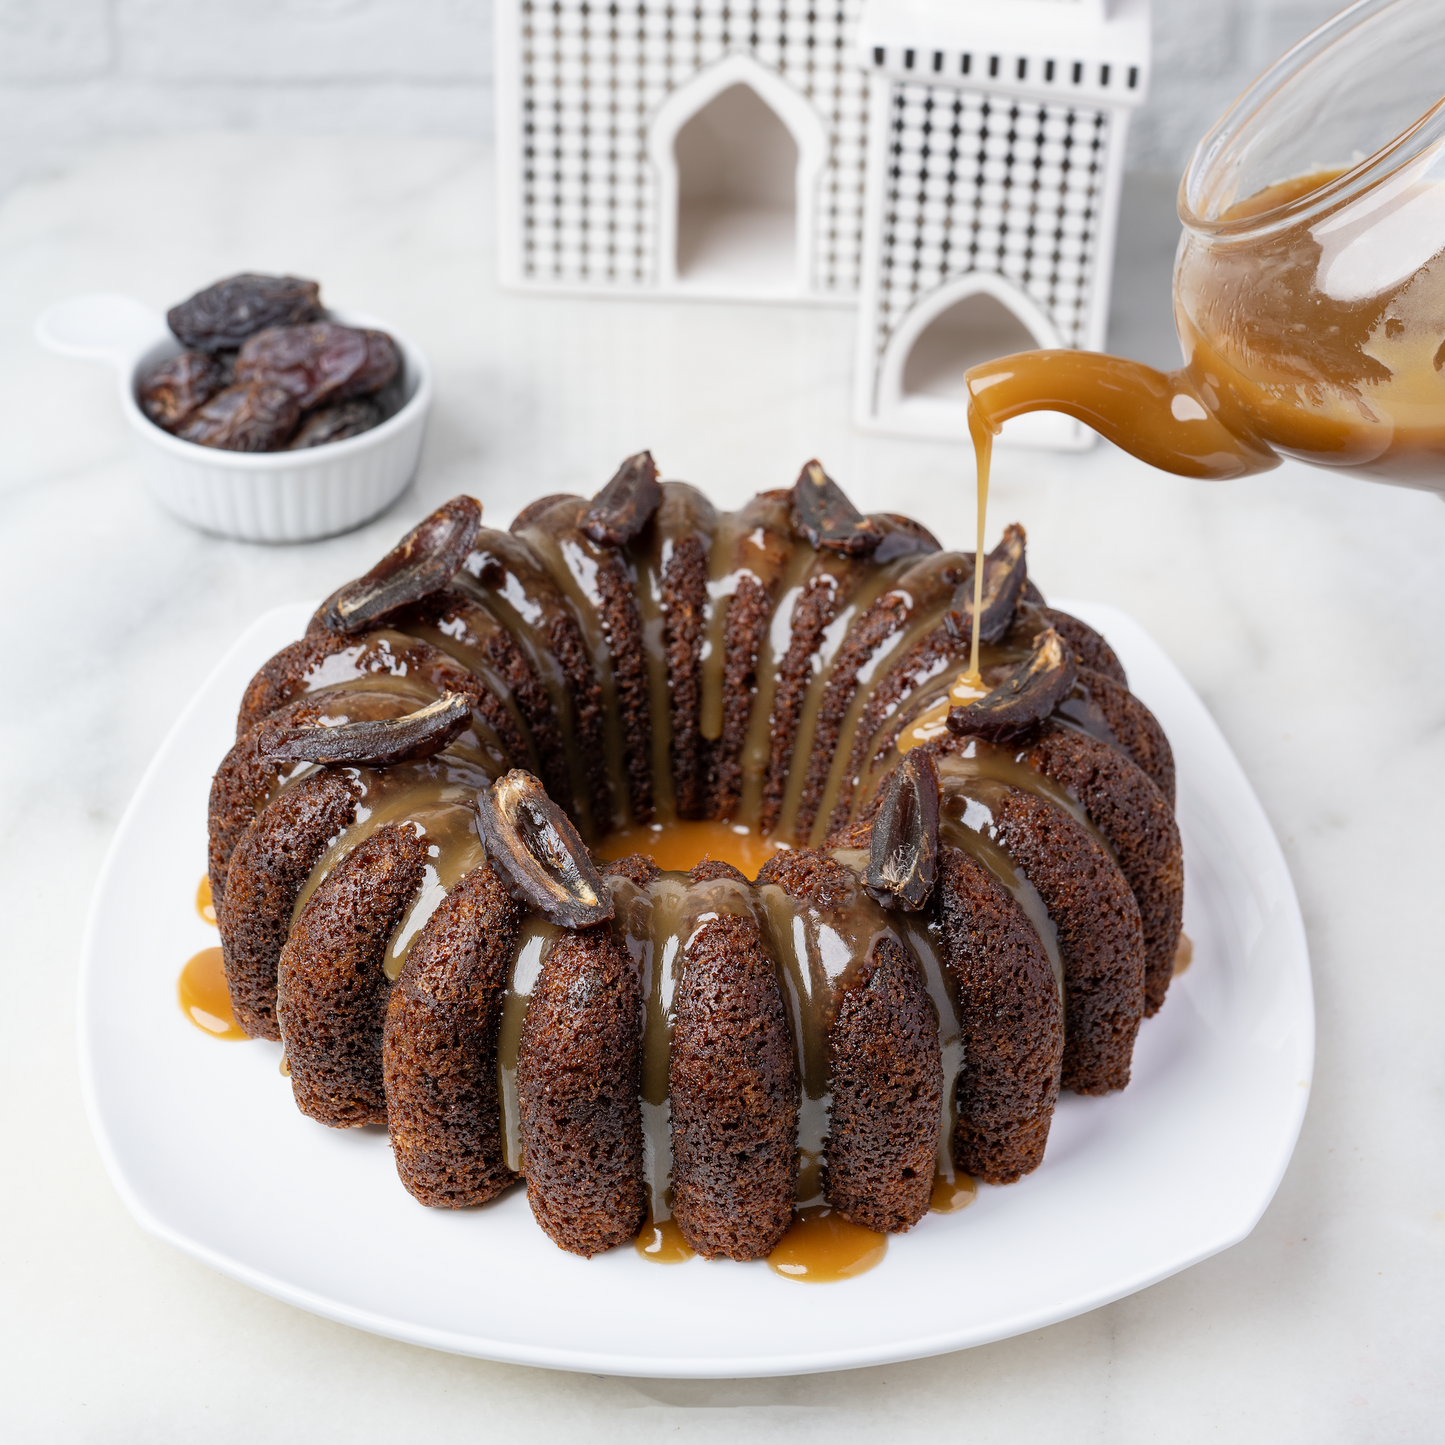 Sticky Toffee Pudding Date Cake